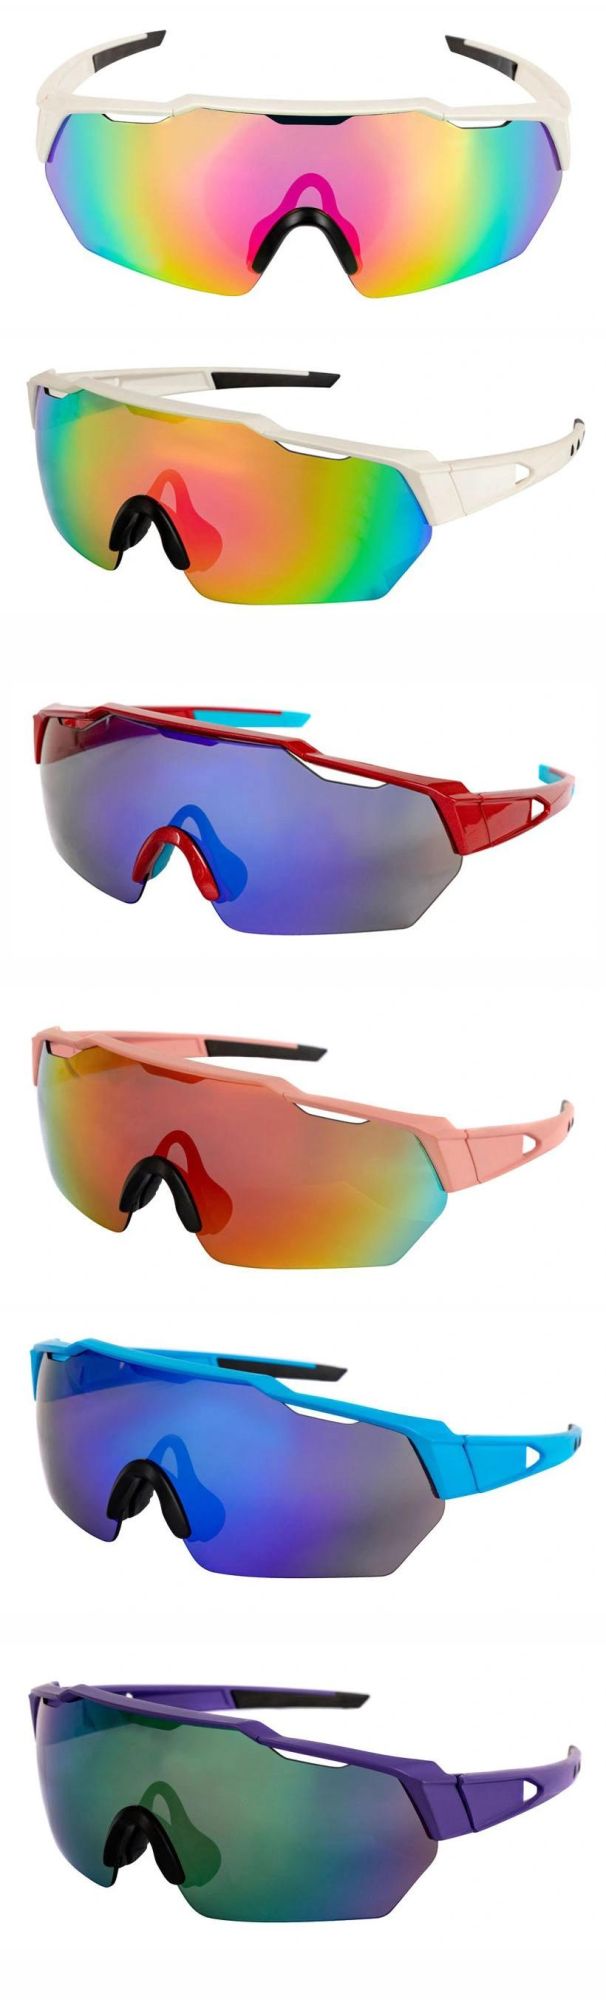 SA0803 One Piece Lens Polycarbonate PC Lens Sport Eyewear Sunglasses Sports Sunglasses Safety Glasses Cycling Mountain Bicycle Men Women Unisex